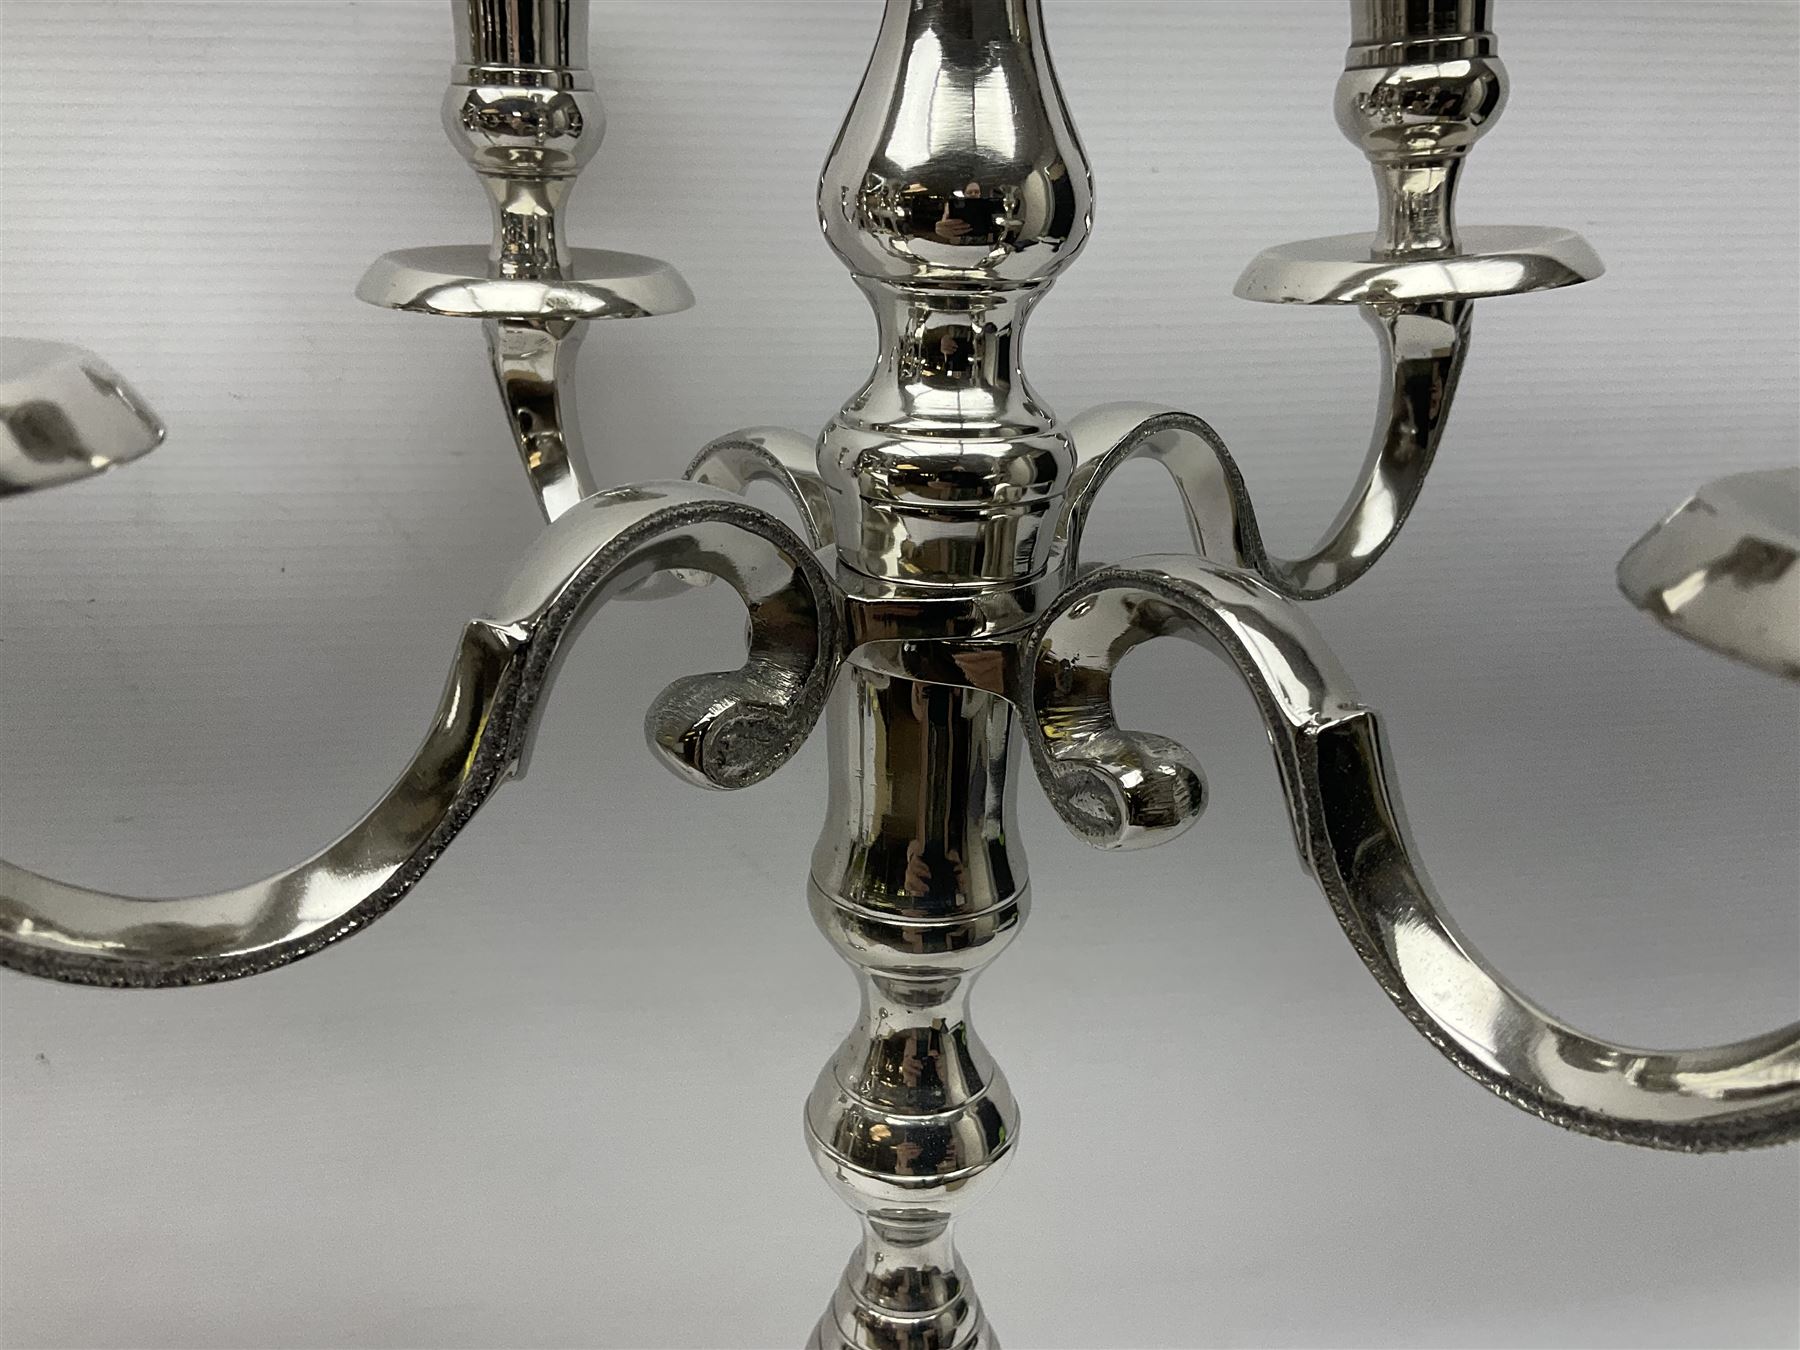 Pair of four branch candelabras - Image 6 of 7